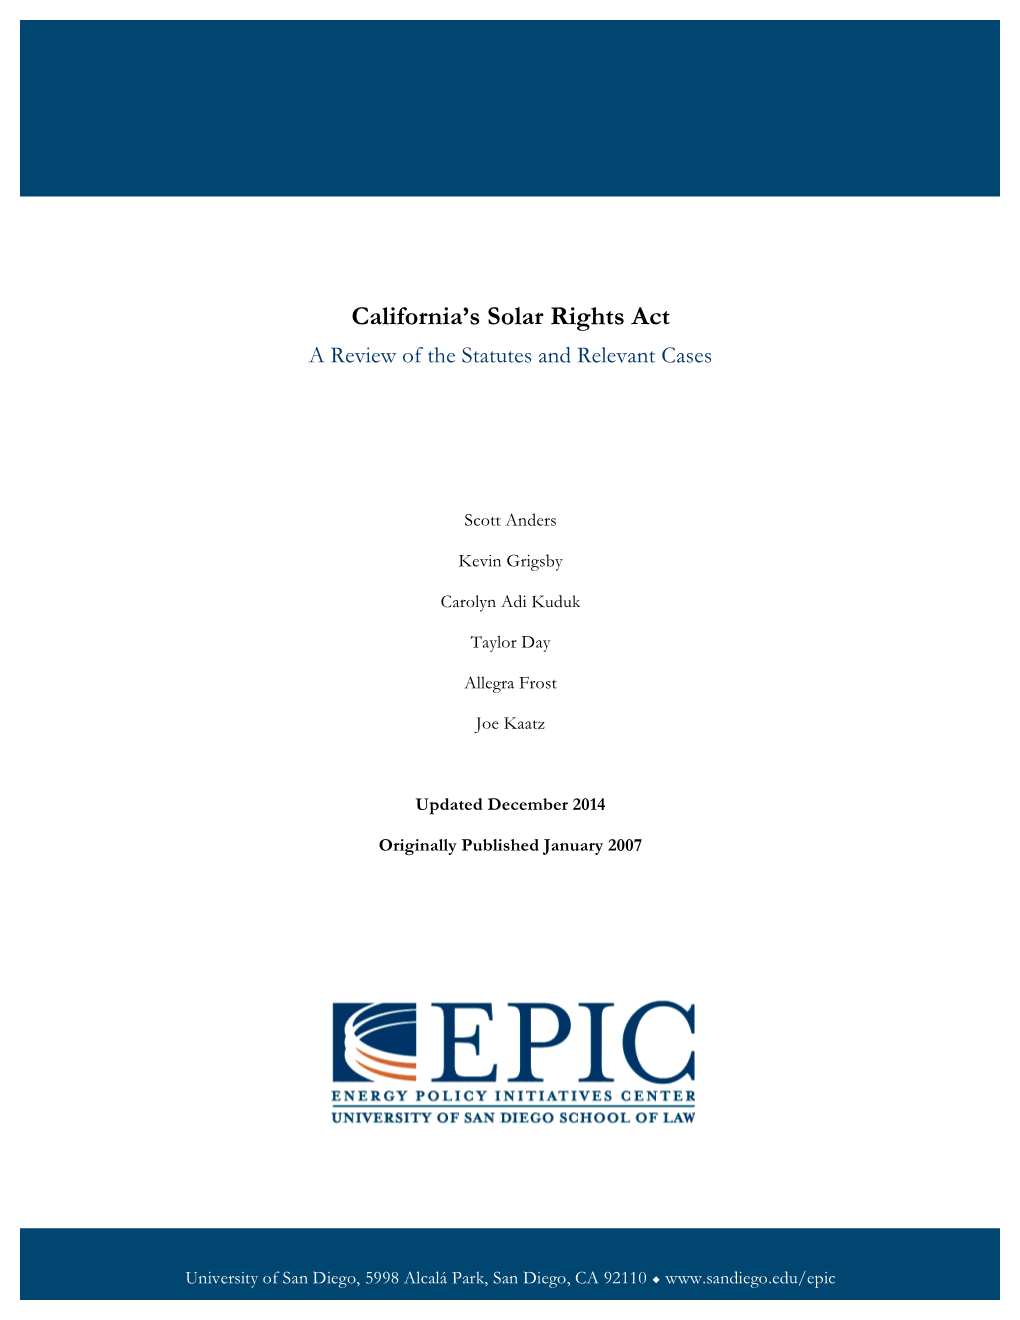 Solar Rights Act a Review of the Statutes and Relevant Cases